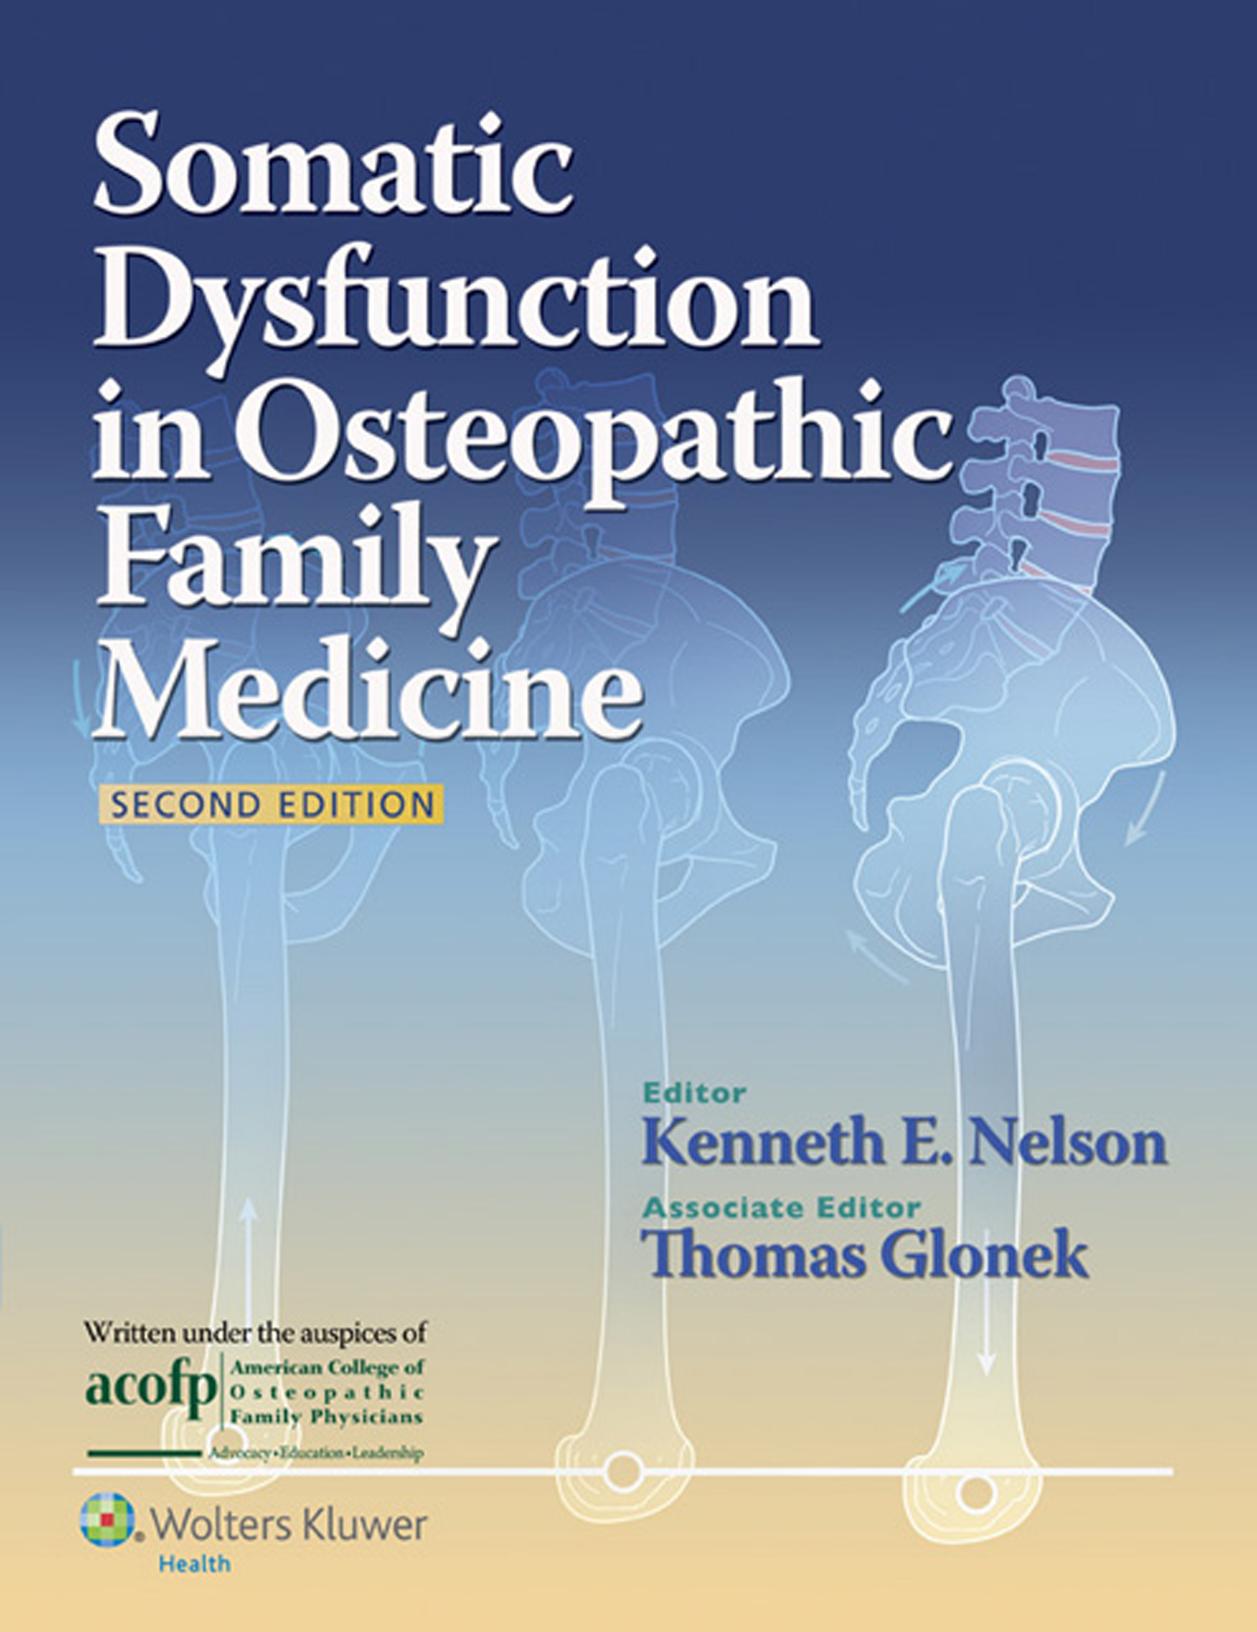 SOMATIC DYSFUNCTION IN OSTEOPATHIC FAMILY MEDICINE, SECOND EDITION